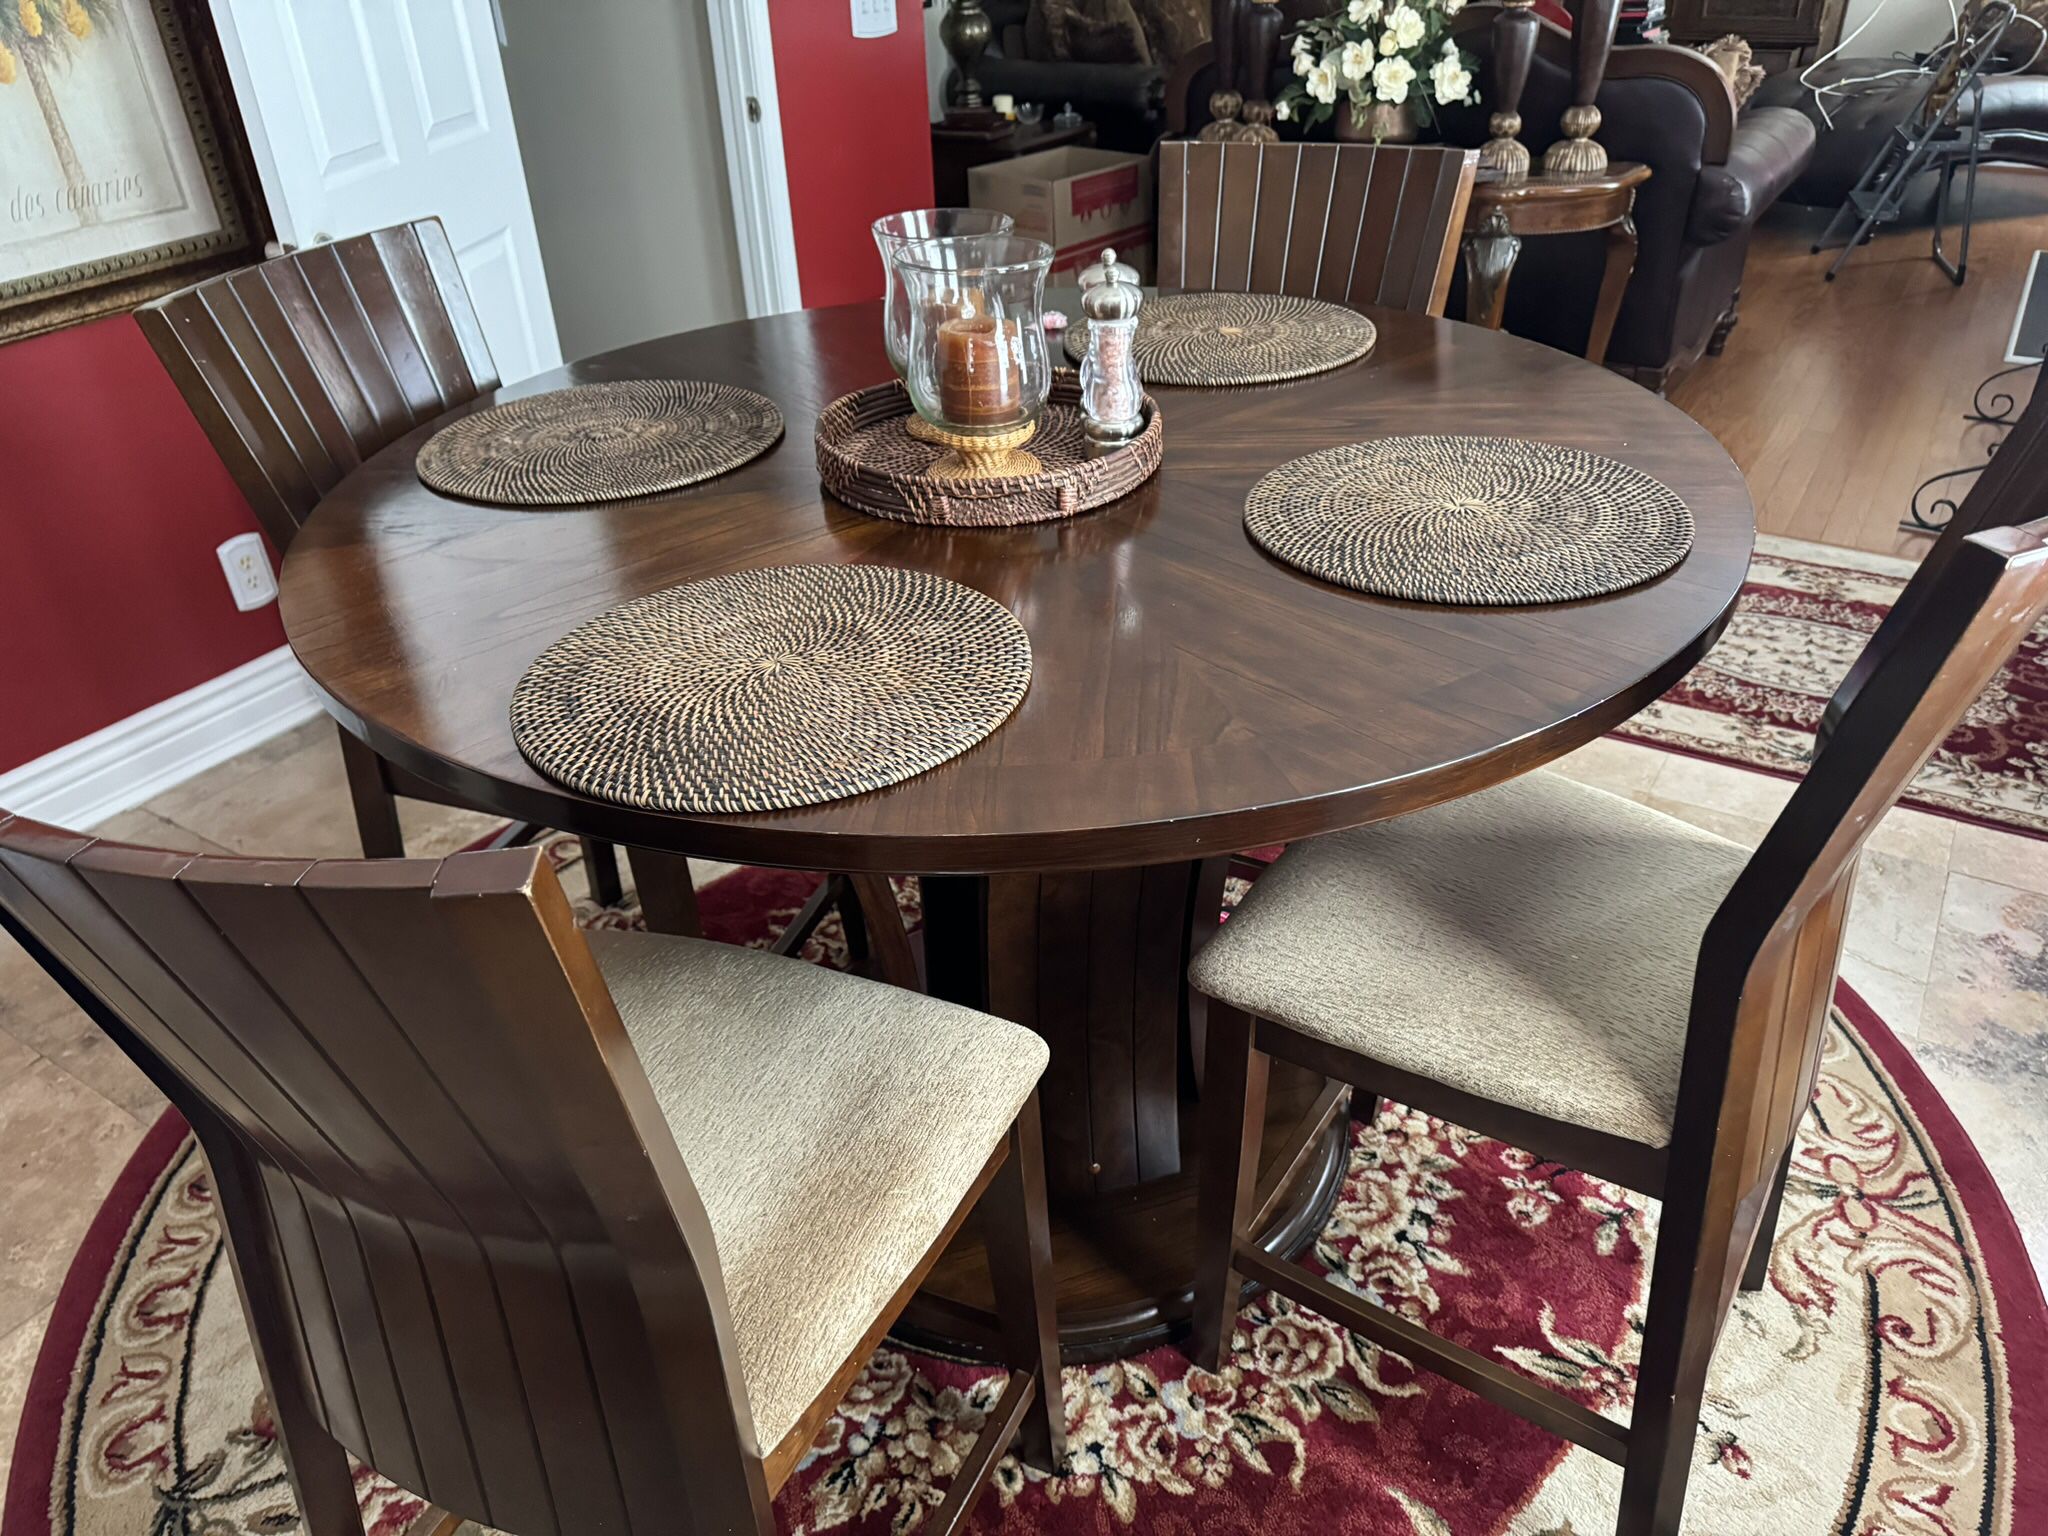 Table and 4 High Chairs